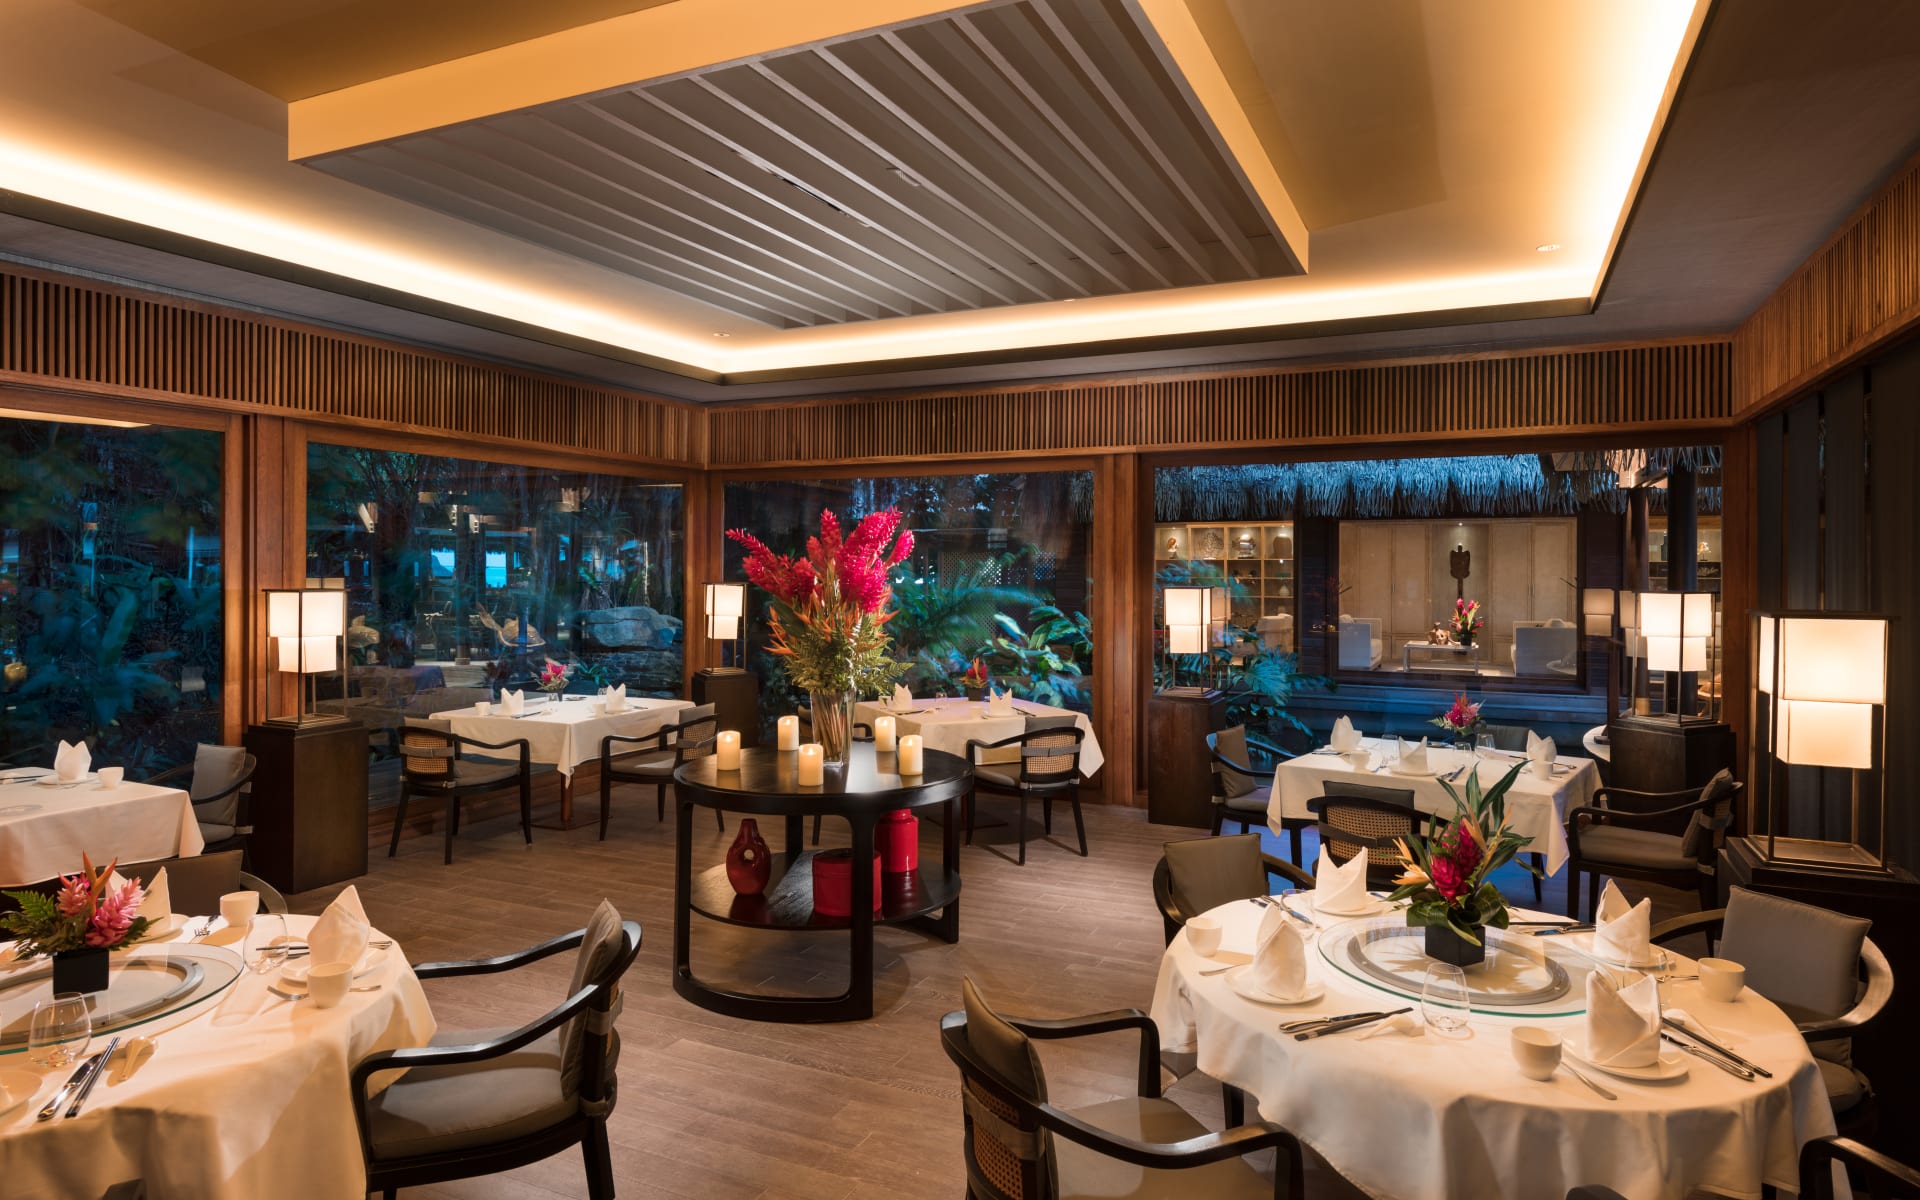 The restaurant has an elegant design with white-clothed tables and floor-to-ceiling windows. 